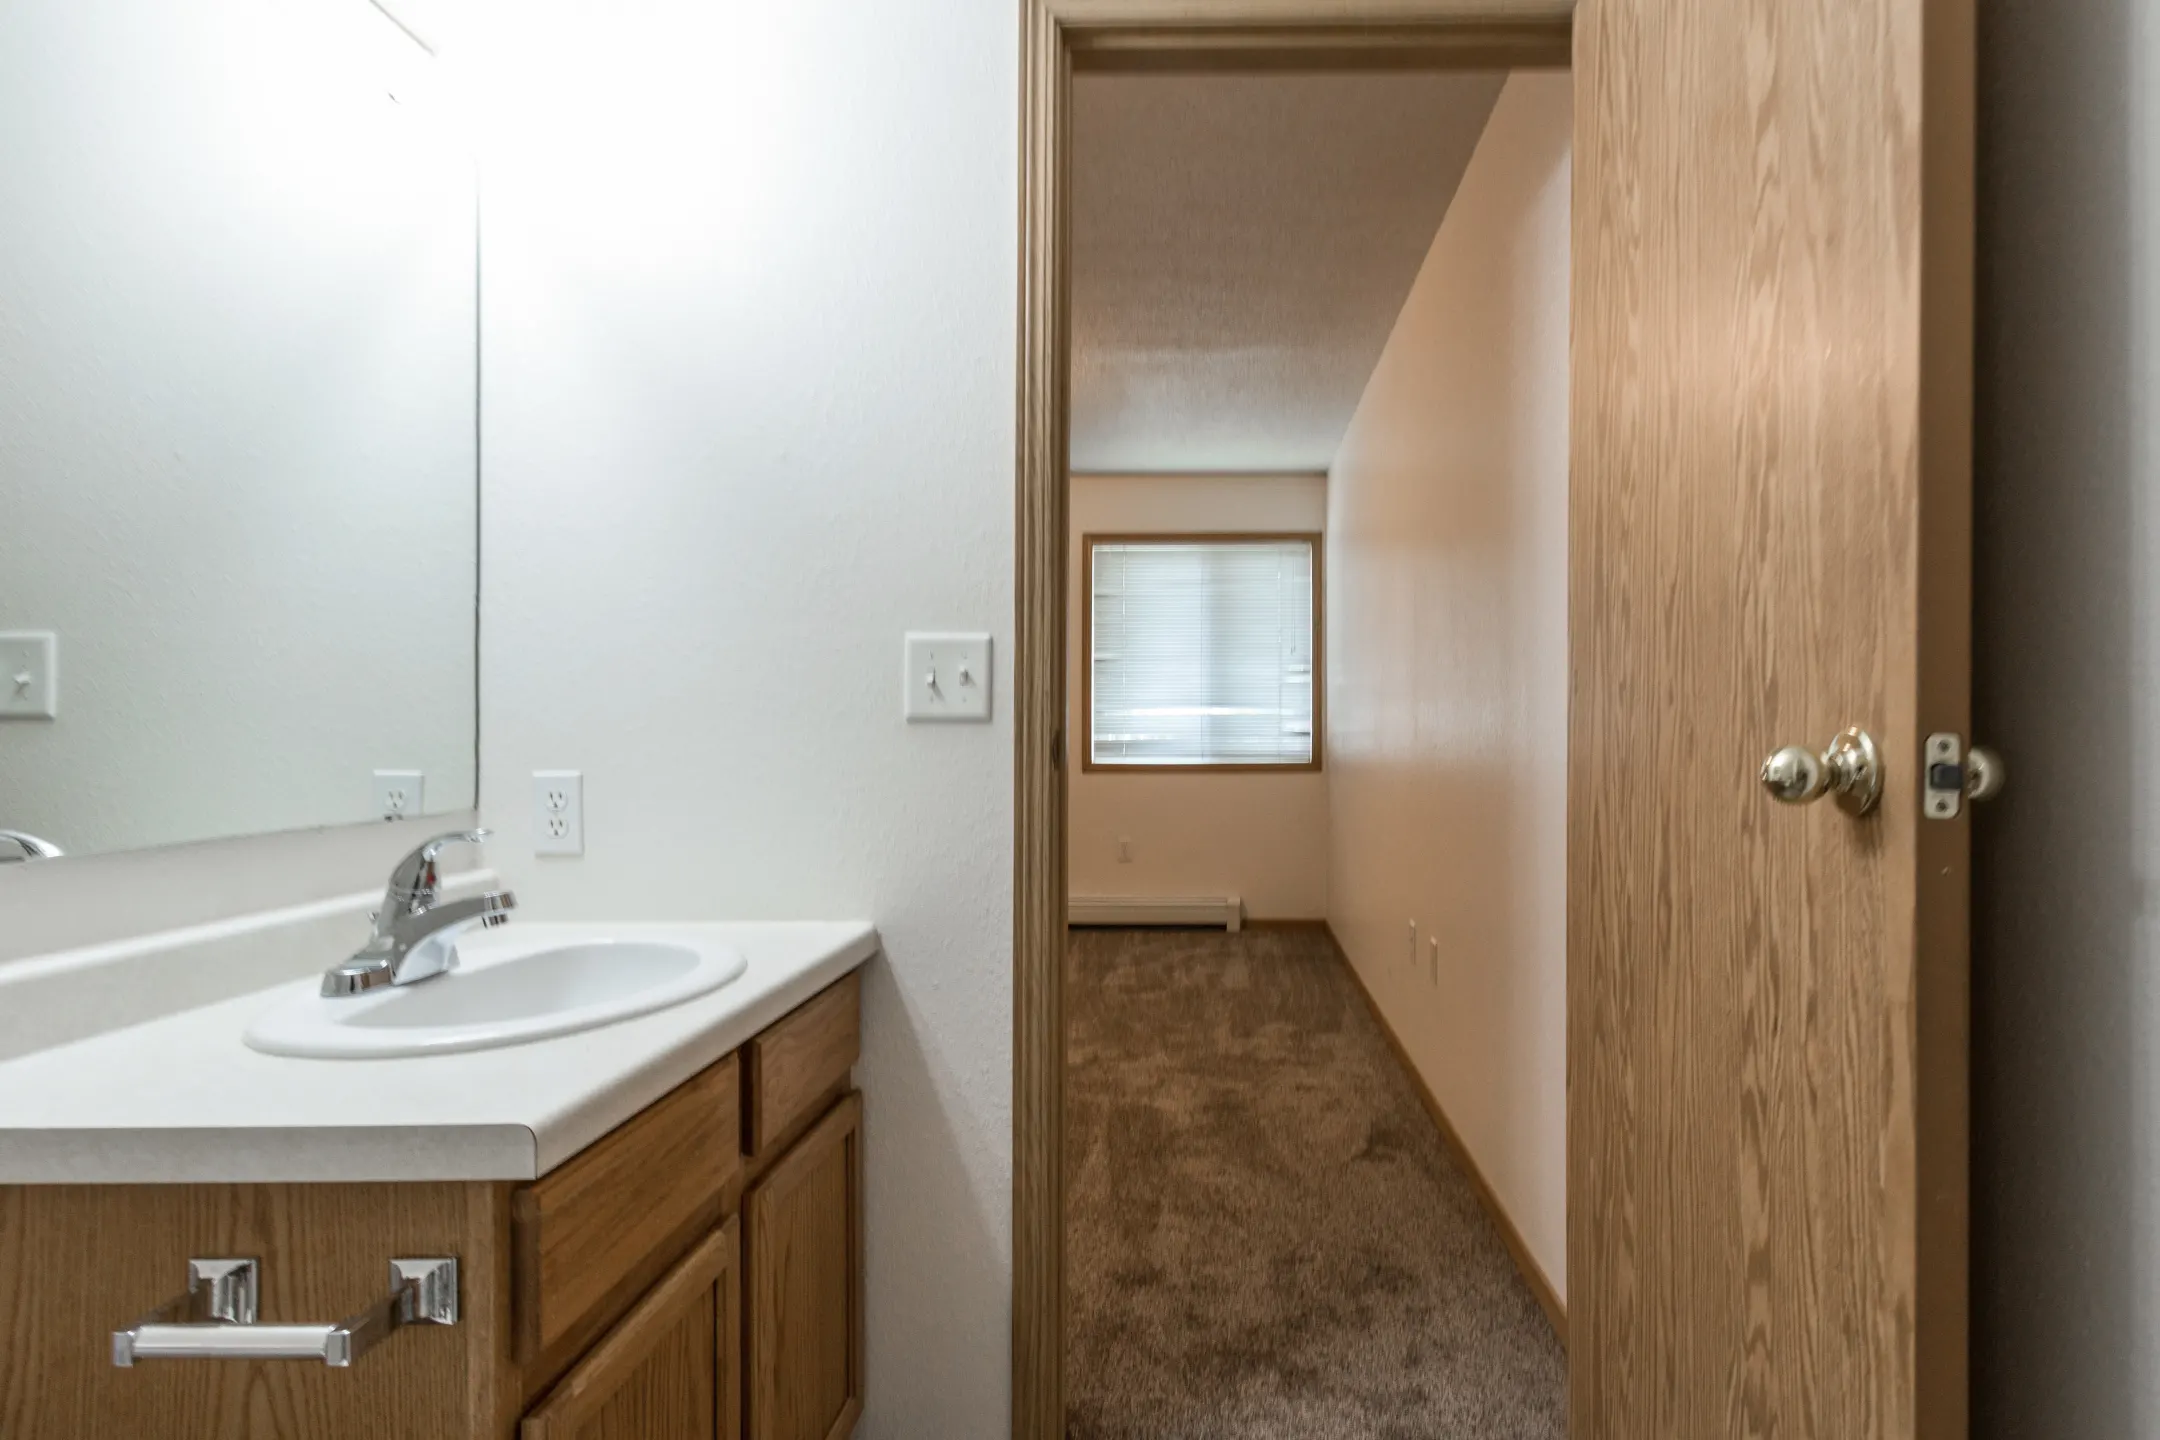 Bathroom - Wheatland Place Apartments & Townhomes - Fargo, ND